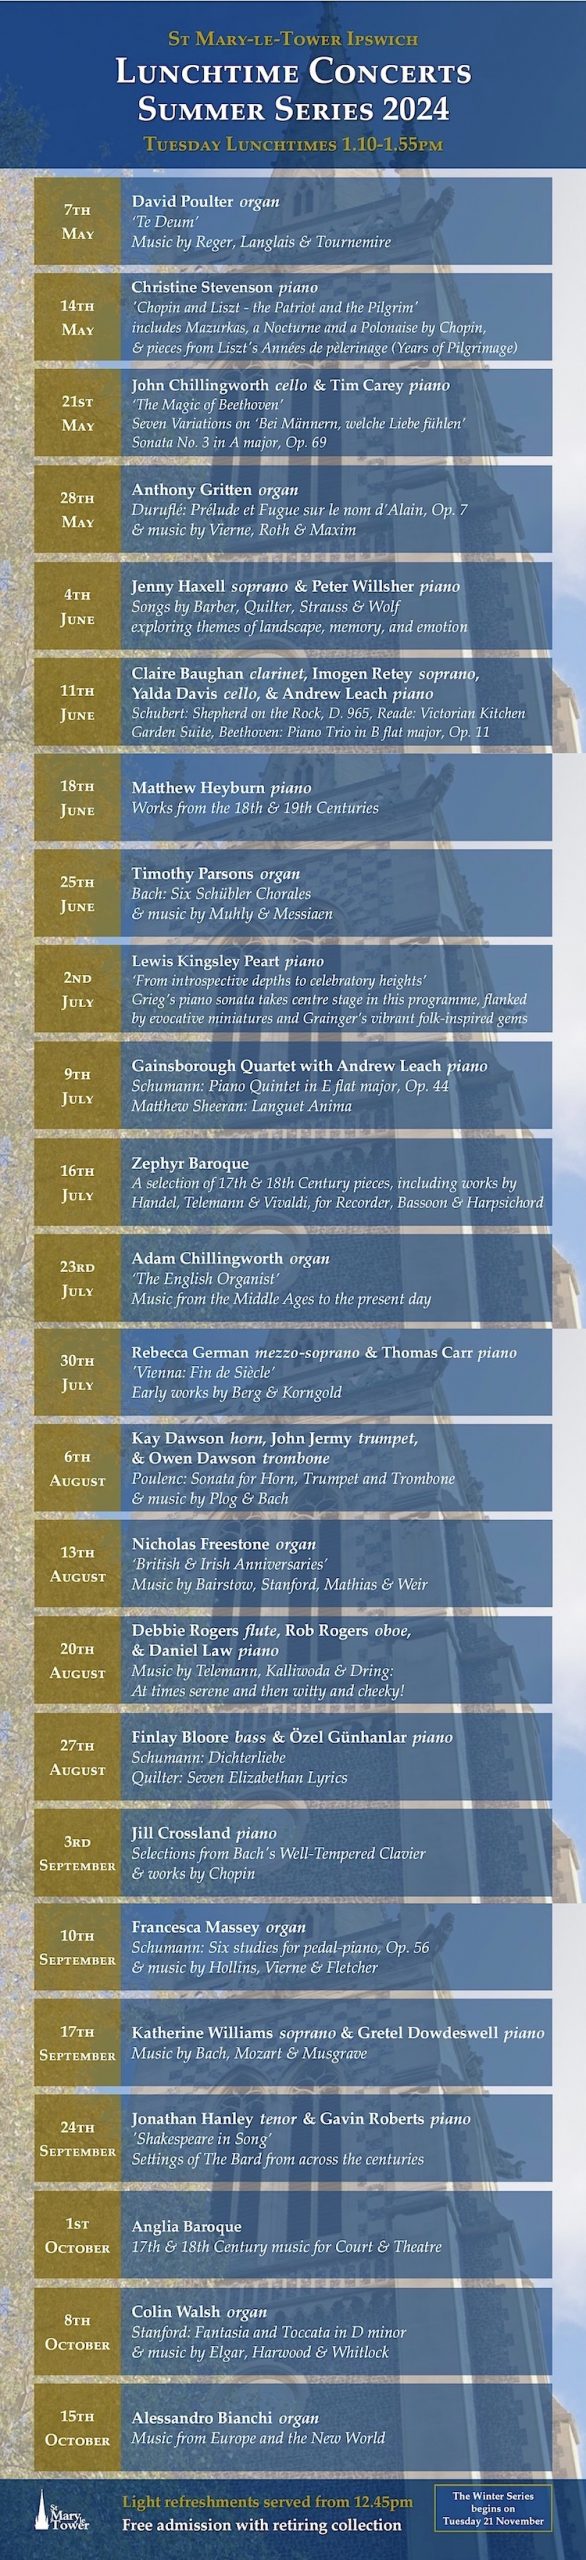 St Mary-le-Tower Church, Ipswich Lunchtime Concerts - Summer Series 2024 Tuesday Lunchtimes 1.10-1.55pm